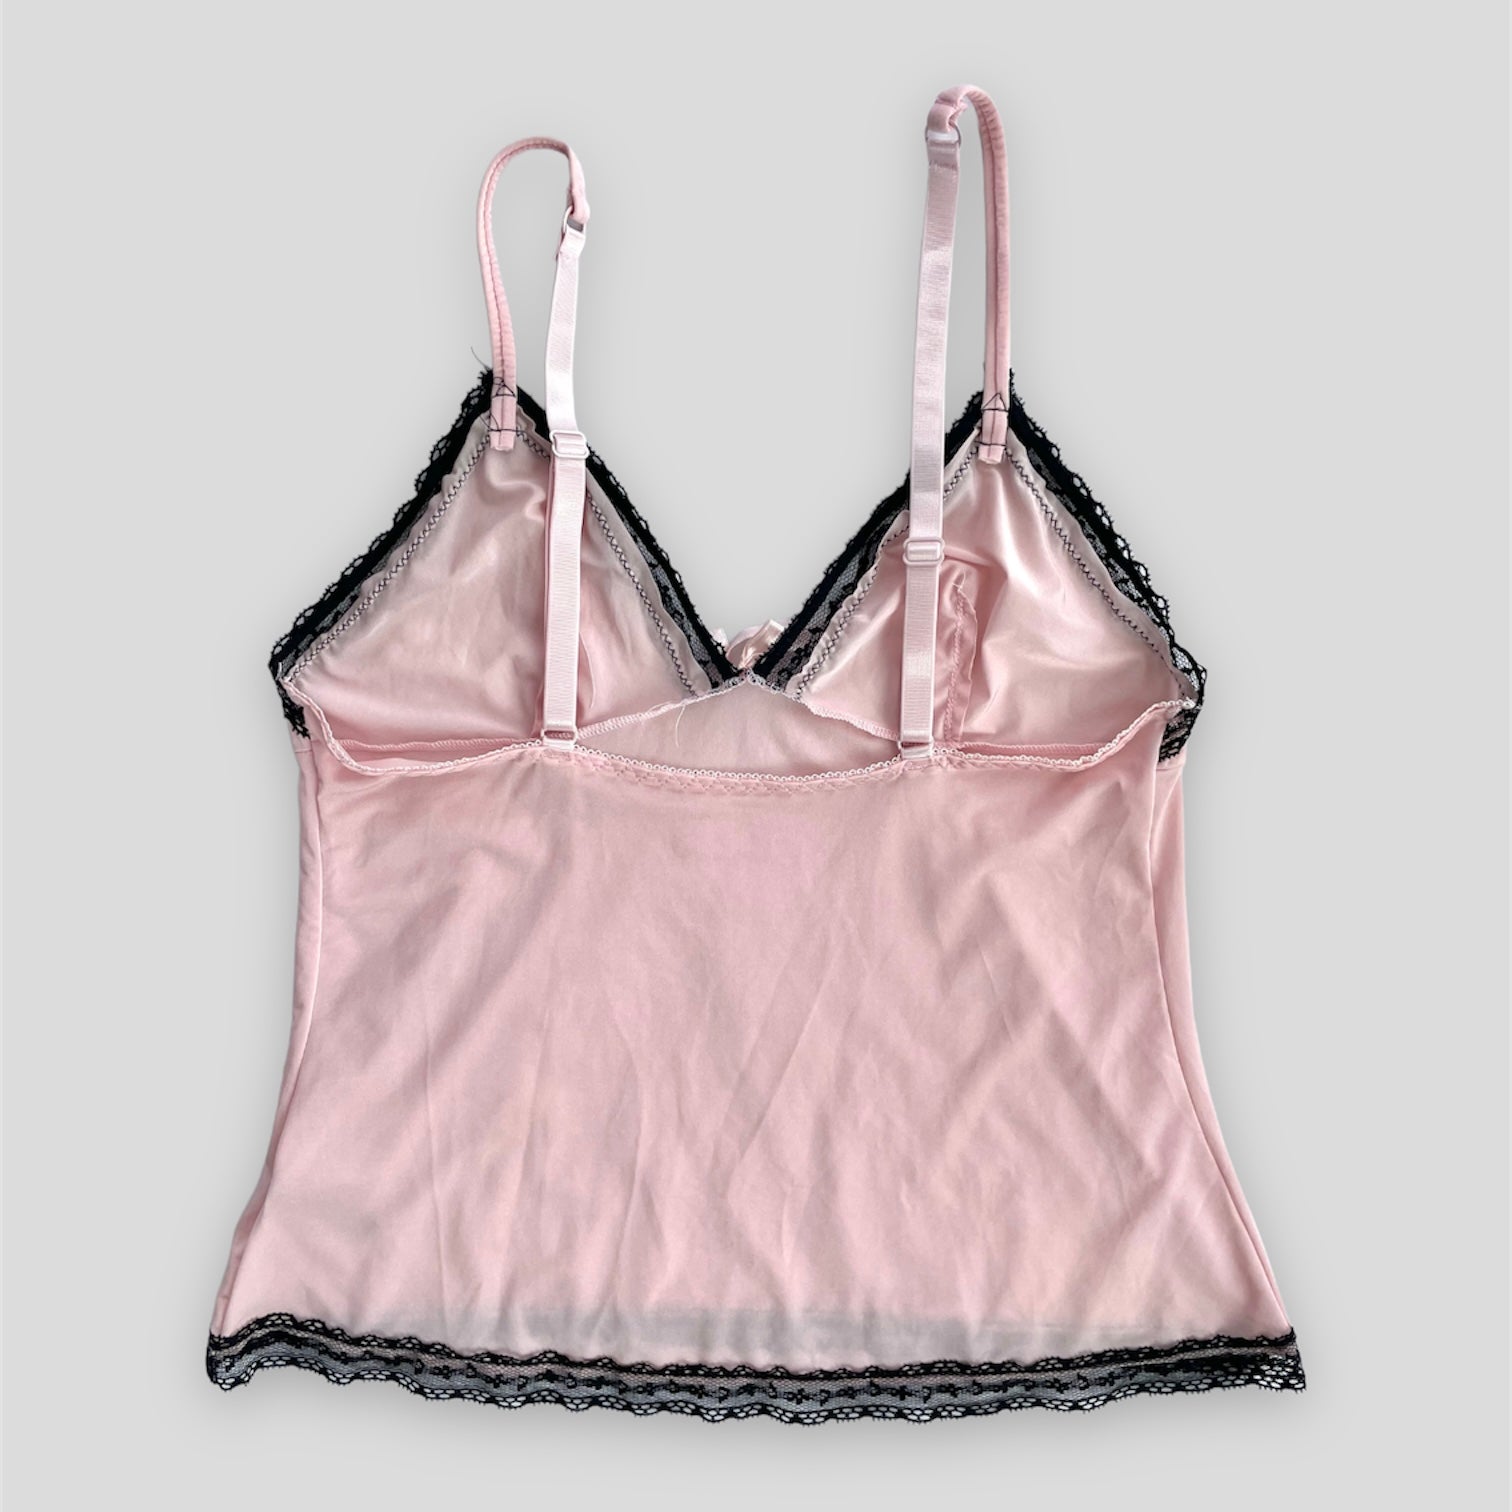 Lipt The Label Buckle Bralette Cami Top - Pink